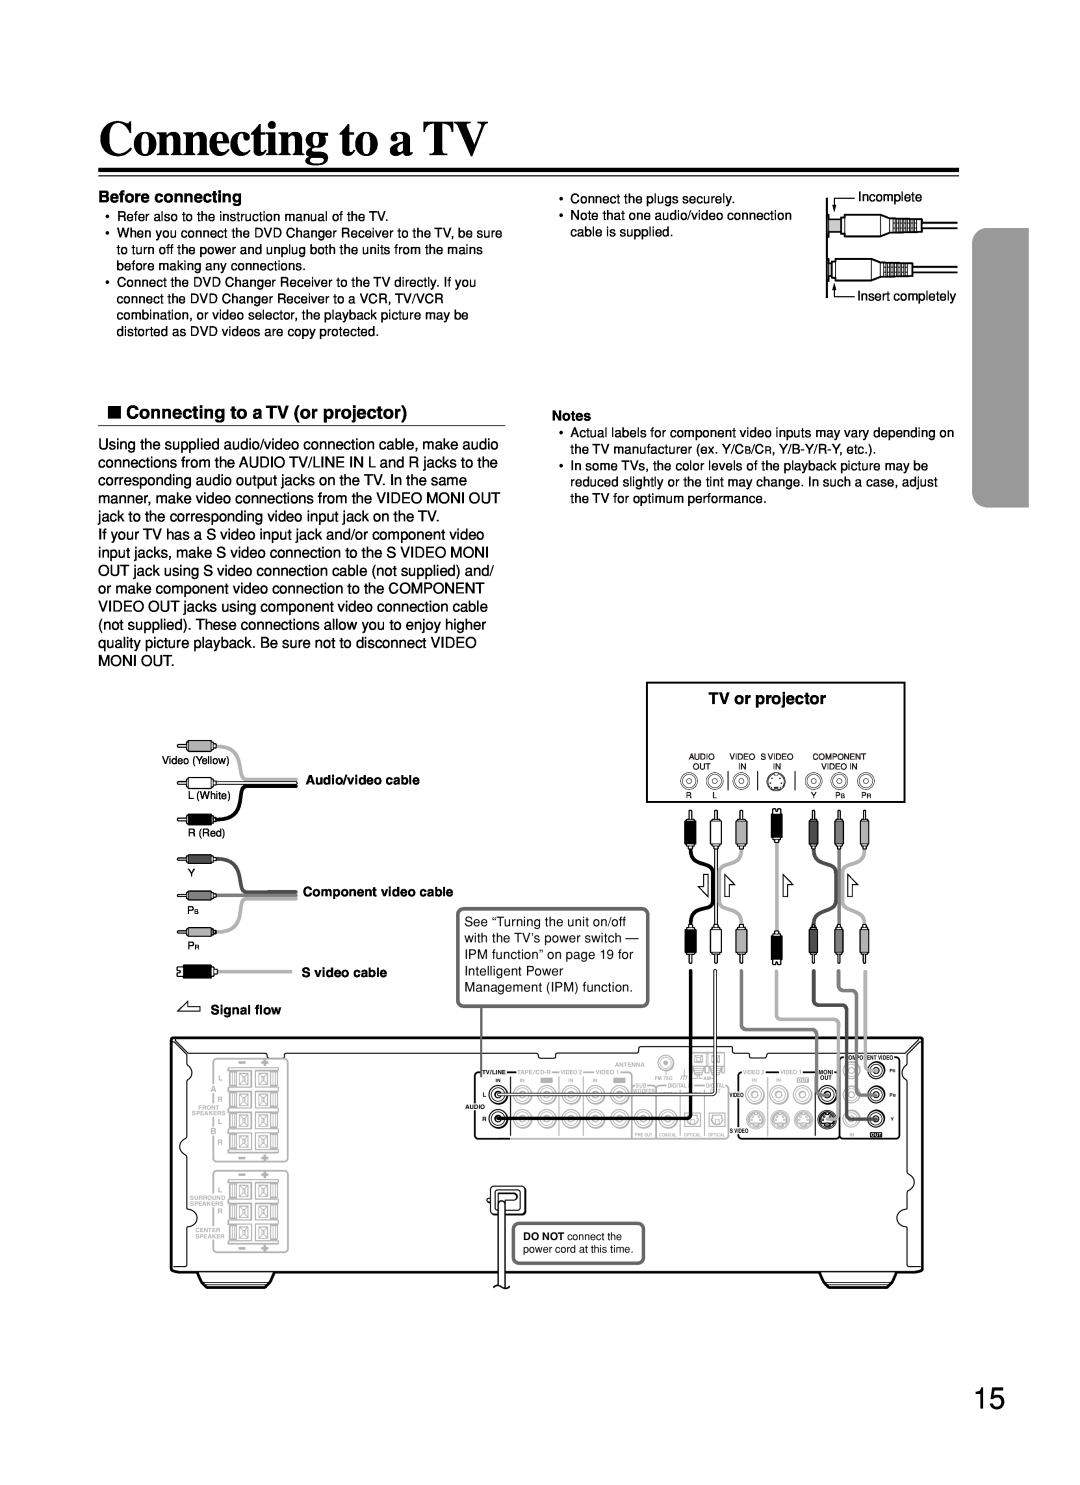 Onkyo DR-C500 instruction manual Connecting to a TV or projector, Before connecting 